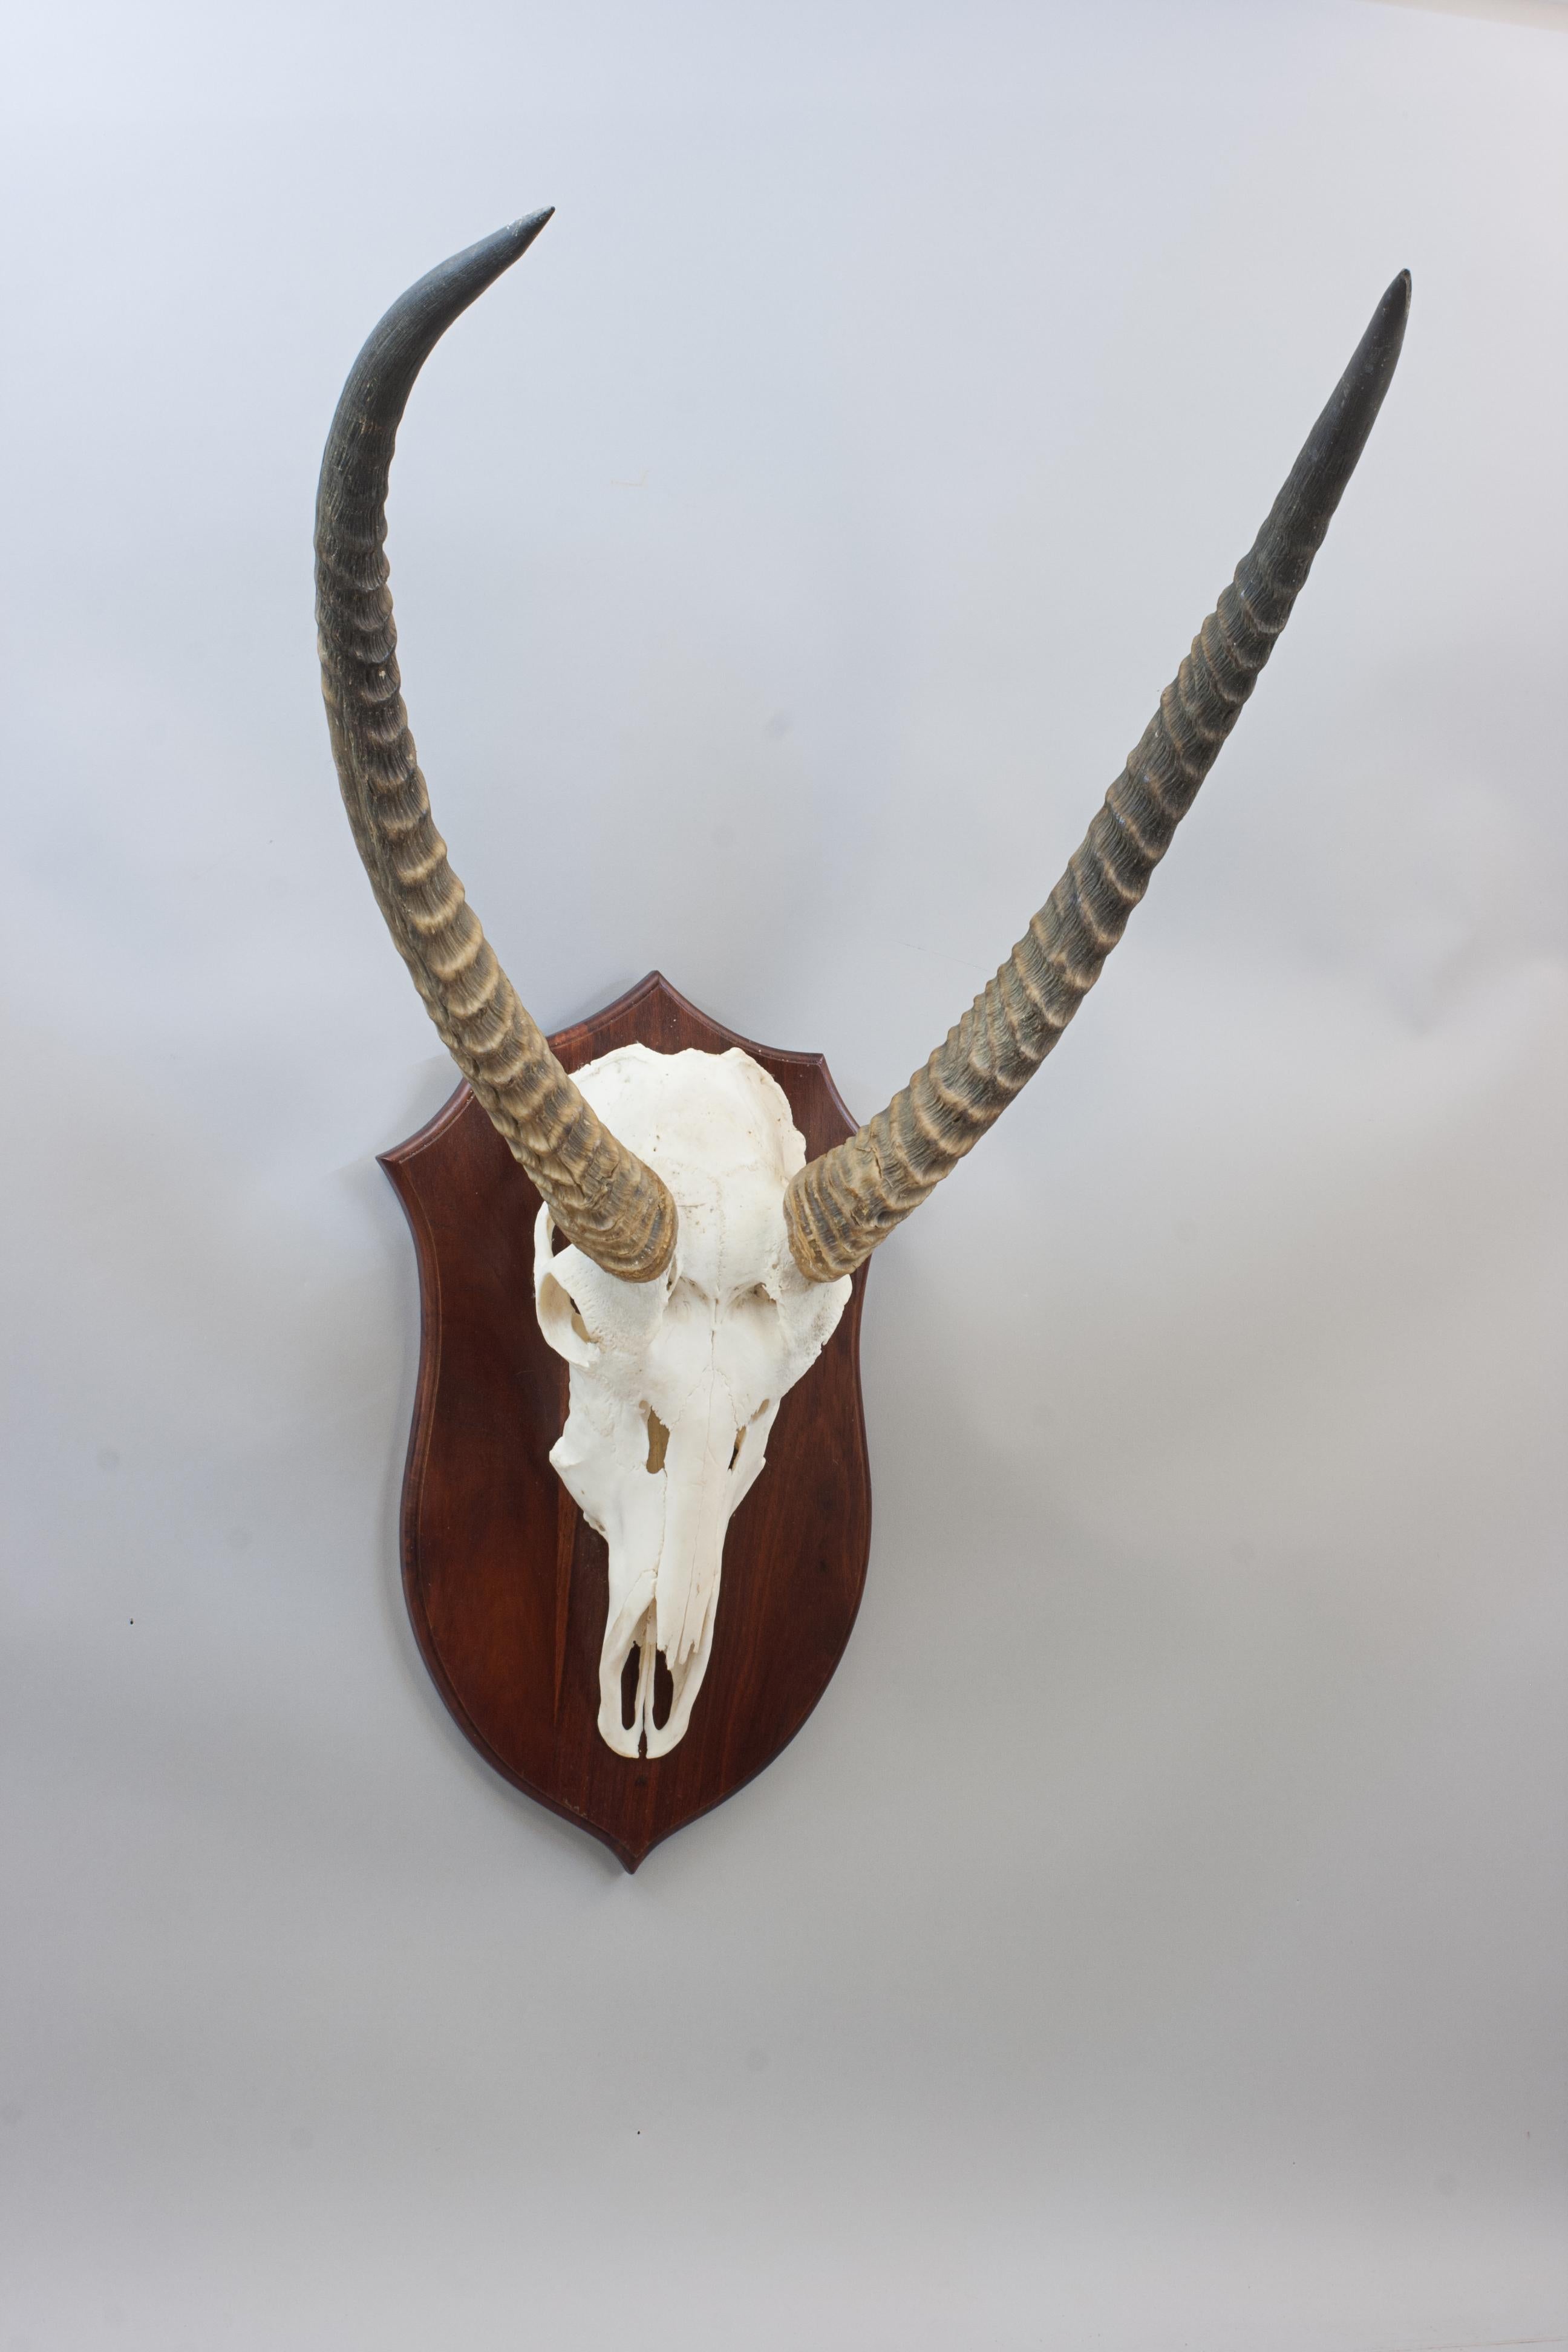 Big Game Taxidermy, Waterbuck.
This prepared big game trophy skull mount is of a Water Buck, it may not be antique but it is very impressive. The taxidermy is clean and well prepared, taxidermist unknown. A great pair of spiral-structured horns